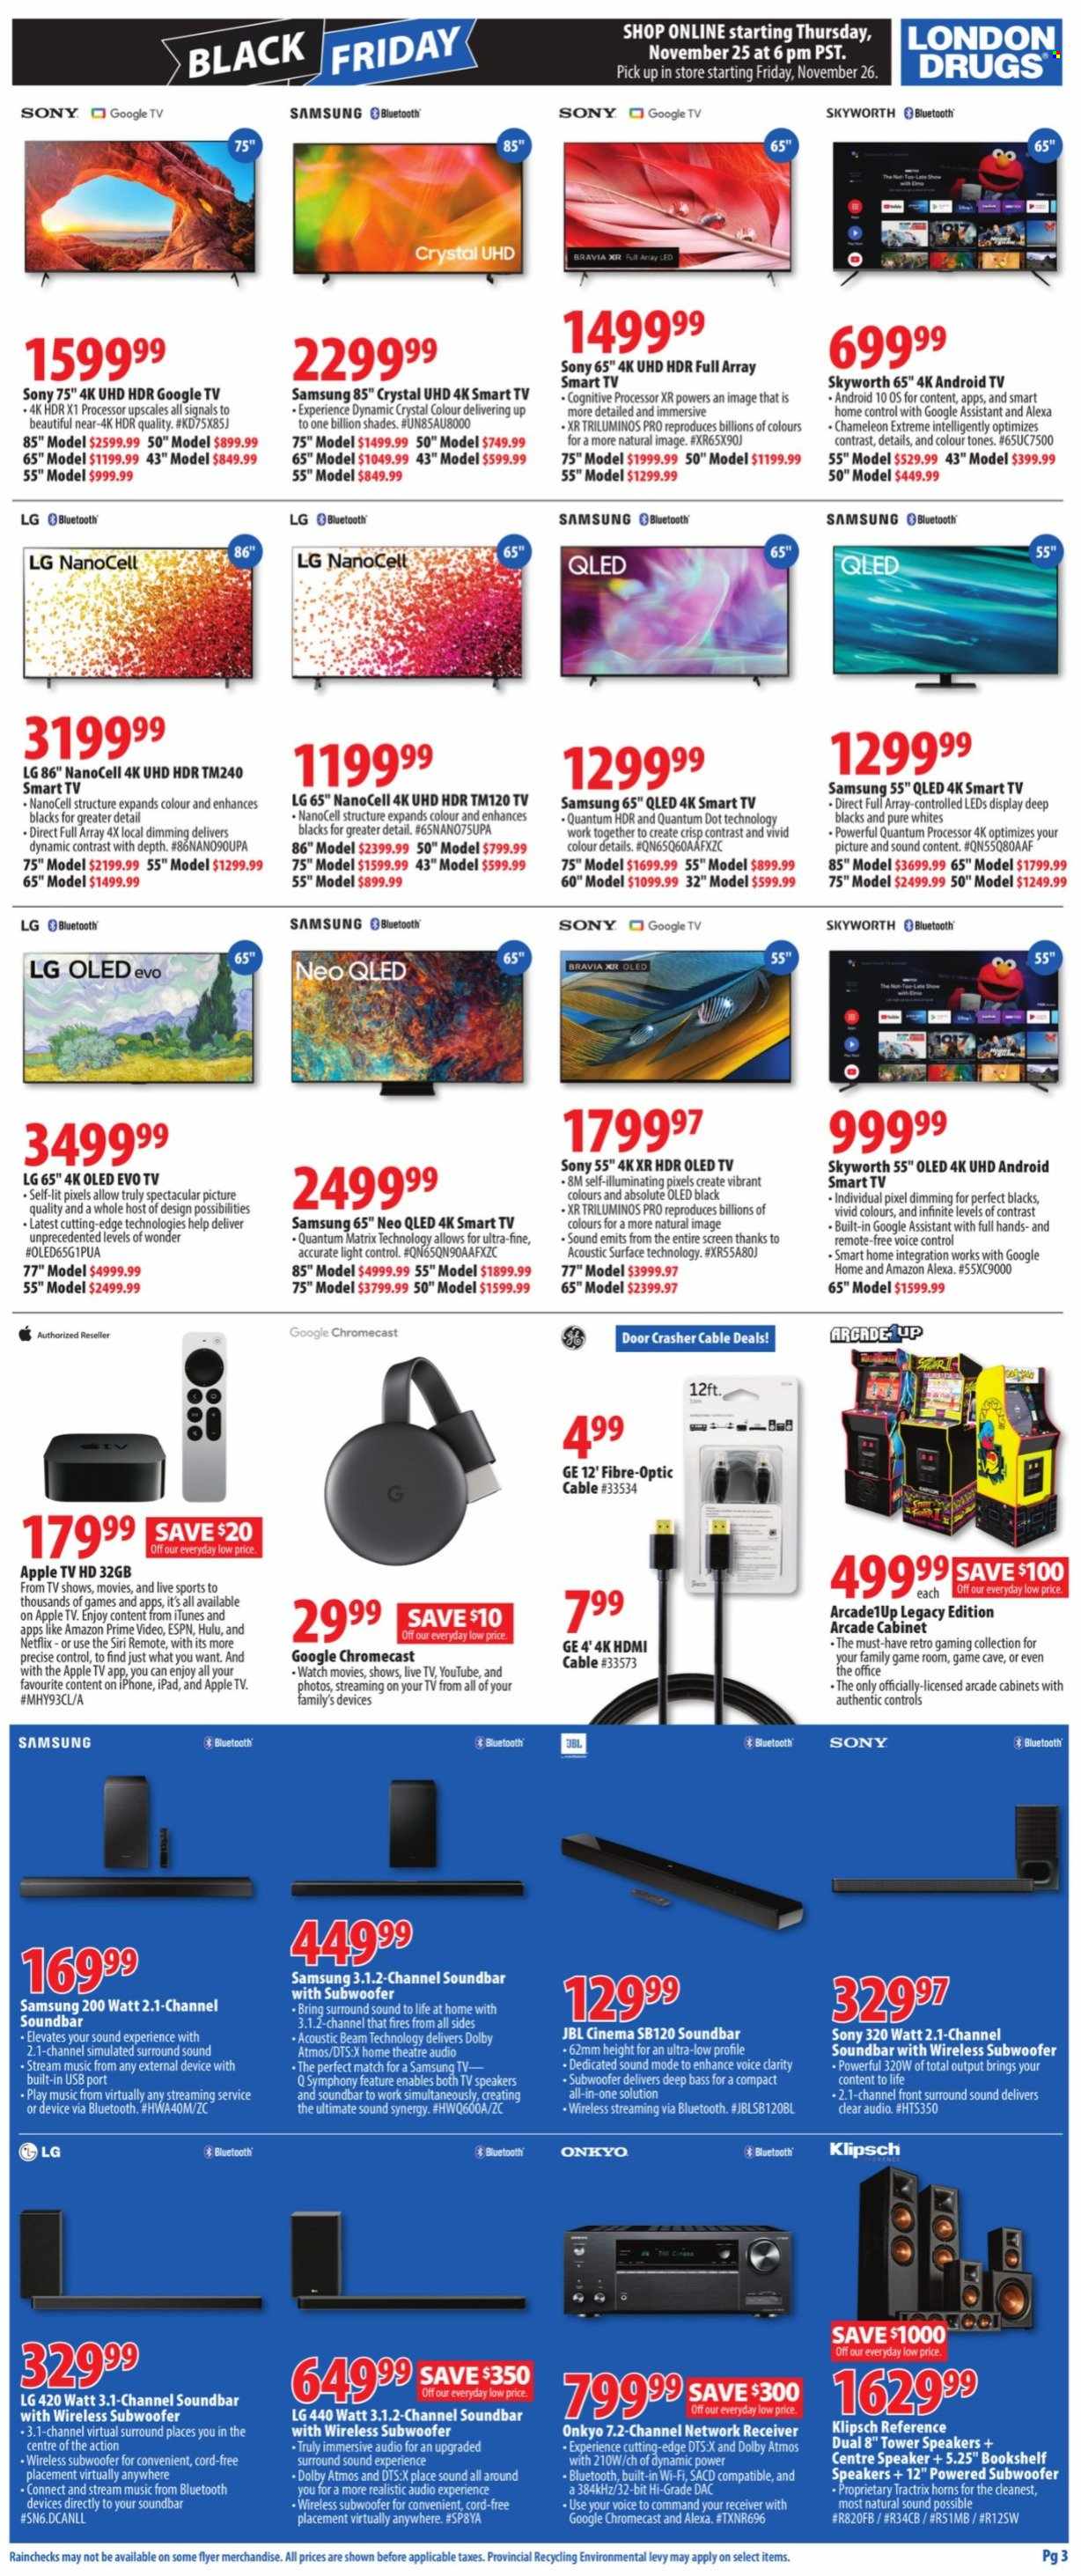 thumbnail - London Drugs Flyer - November 26, 2021 - December 01, 2021 - Sales products - Sony, Apple, iPad, DAC, Absolute, shades, Samsung, iPhone, receiver, HDMI cable, Android TV, samsung tv, TV, Skyworth, ONKYO, speaker, subwoofer, wireless subwoofer, sound bar, Google Chromecast, book shelf, LG, smart tv, JBL. Page 5.